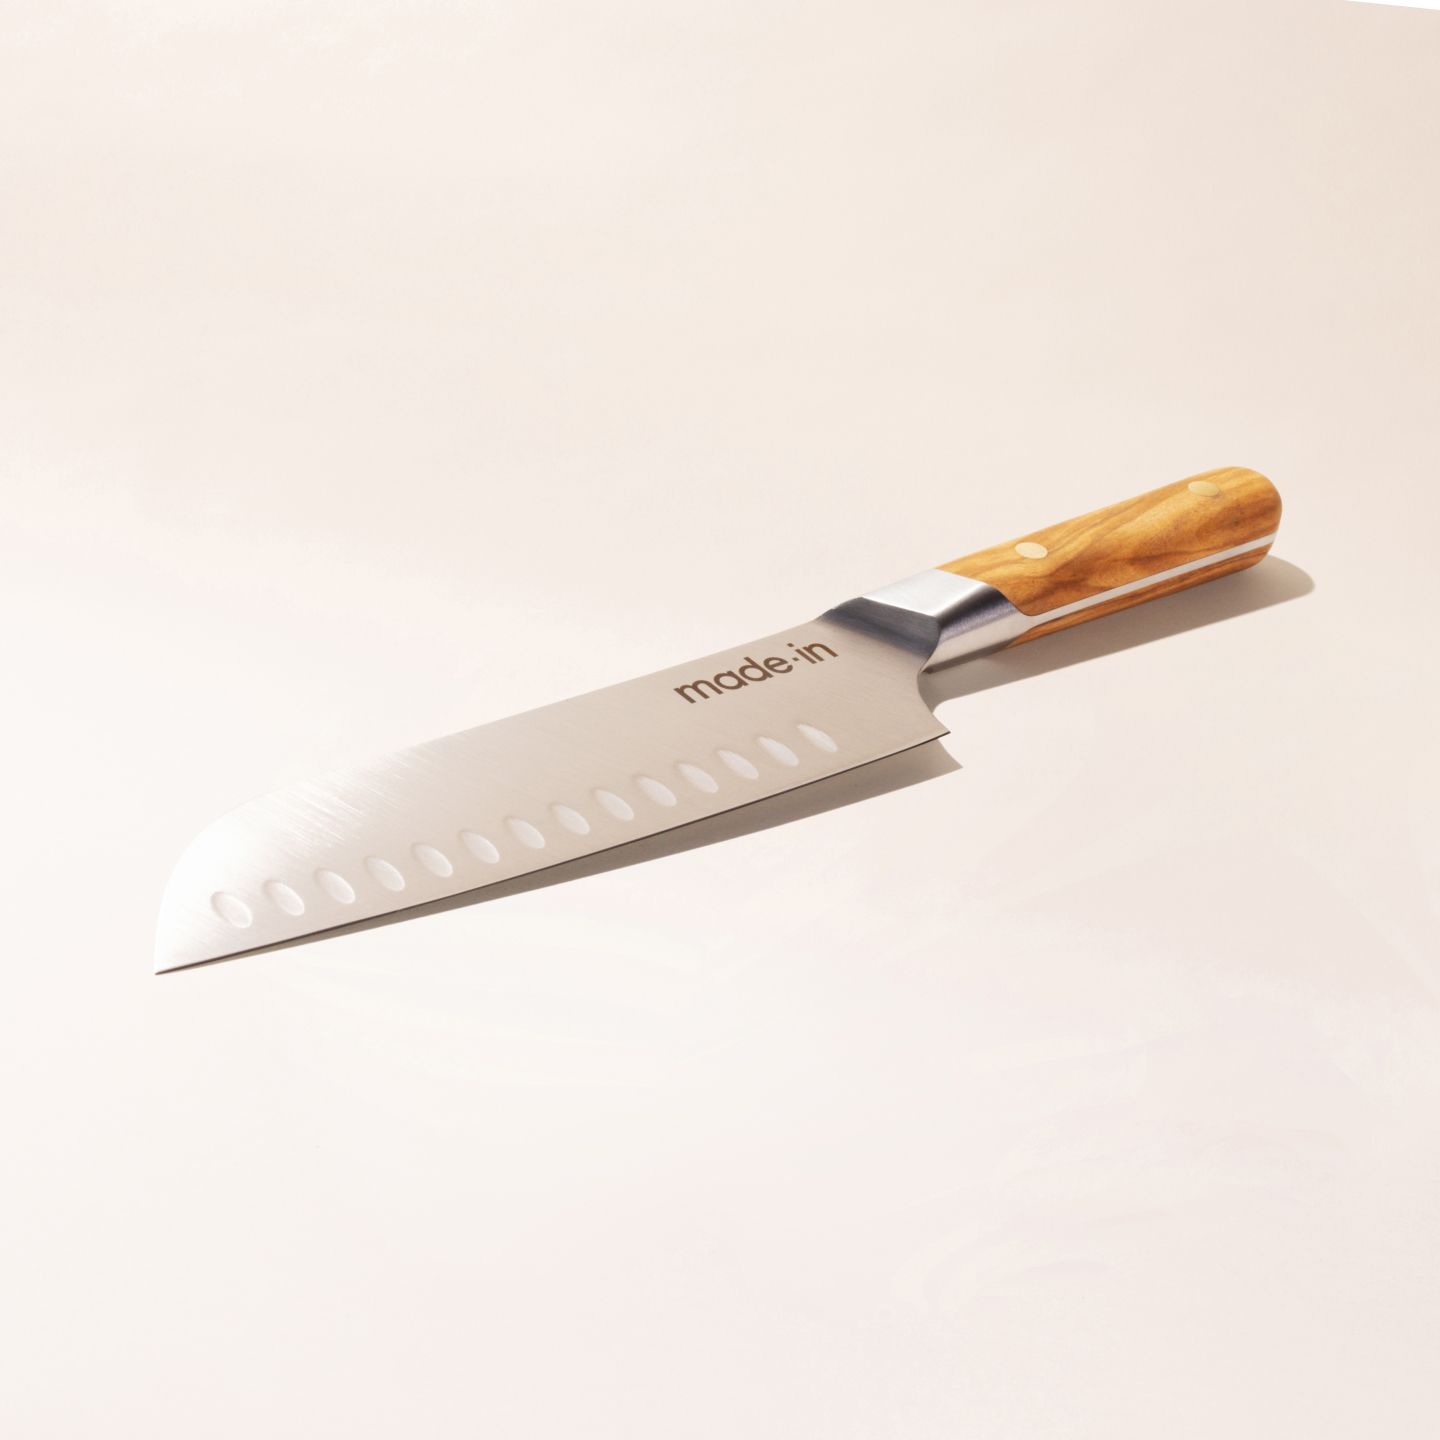 Pampered Chef 1577 5 Forged Steel, Full Tang Santoku Knife Brand New